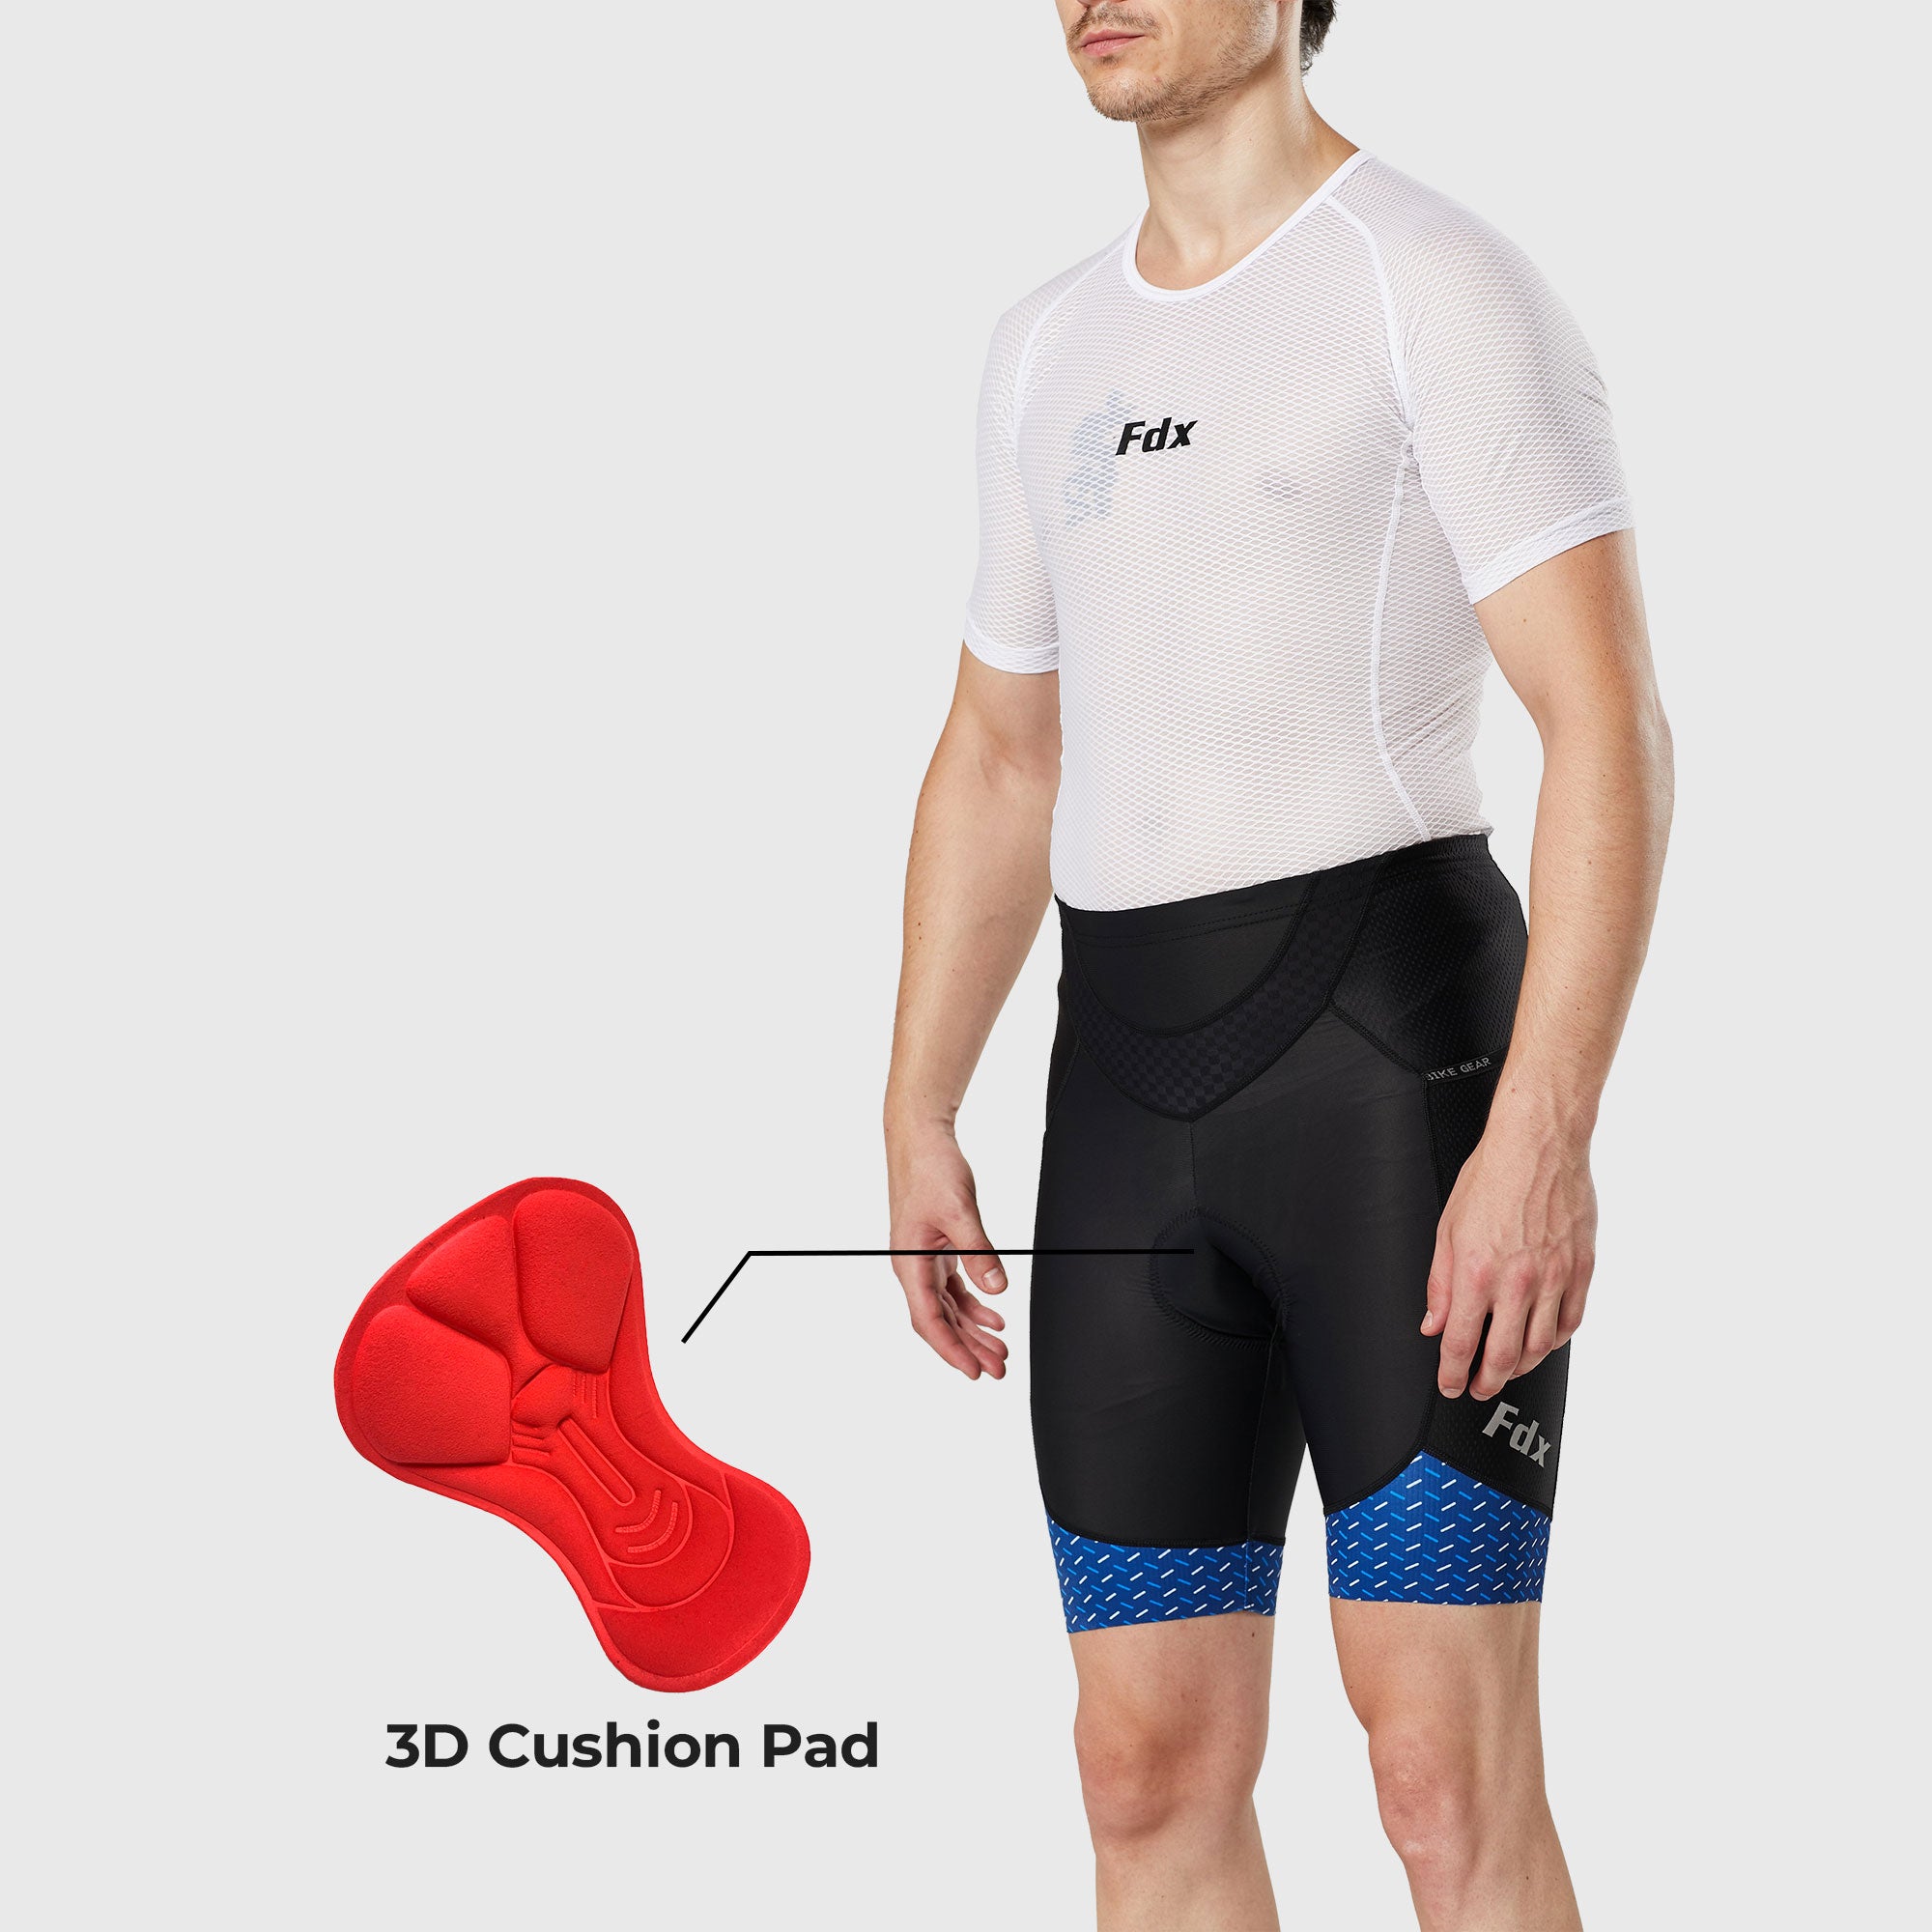 Men’s Black & Blue Cycling Shorts 3D Gel Padded comfortable road bike shorts - Breathable Quick Dry biking shorts, ultra-lightweight shorts with pockets